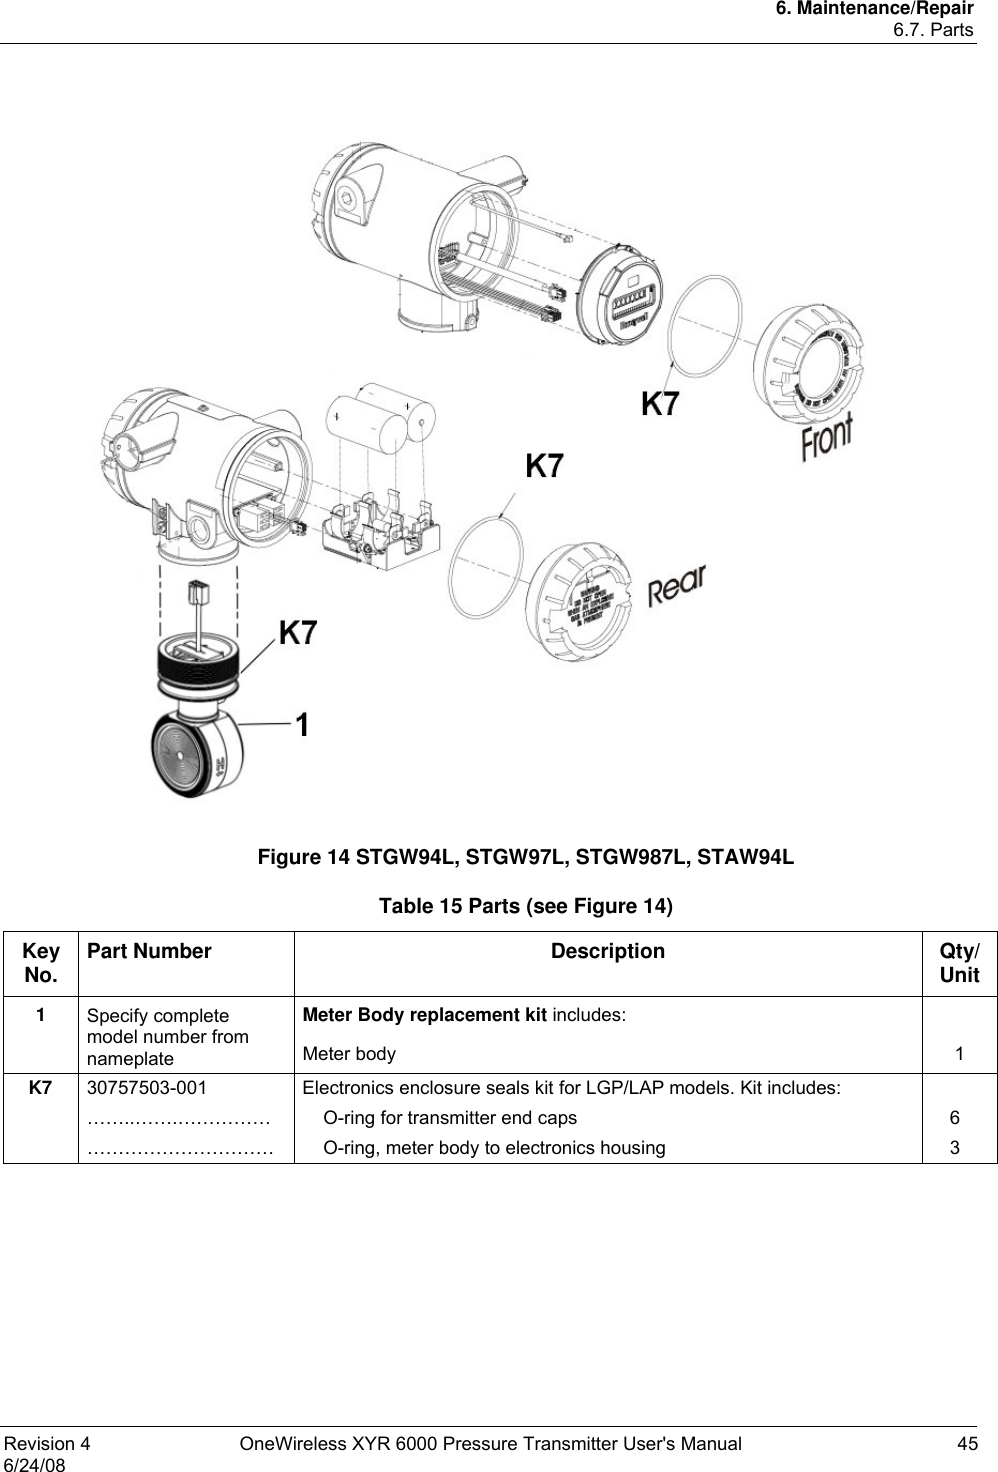 6. Maintenance/Repair 6.7. Parts Revision 4  OneWireless XYR 6000 Pressure Transmitter User&apos;s Manual  45 6/24/08    Figure 14 STGW94L, STGW97L, STGW987L, STAW94L Table 15 Parts (see Figure 14) Key No.   Part Number  Description  Qty/ Unit 1  Specify complete model number from nameplate Meter Body replacement kit includes: Meter body  1 K7 30757503-001 ……..…….…………… ………………………… Electronics enclosure seals kit for LGP/LAP models. Kit includes:     O-ring for transmitter end caps     O-ring, meter body to electronics housing  6 3  